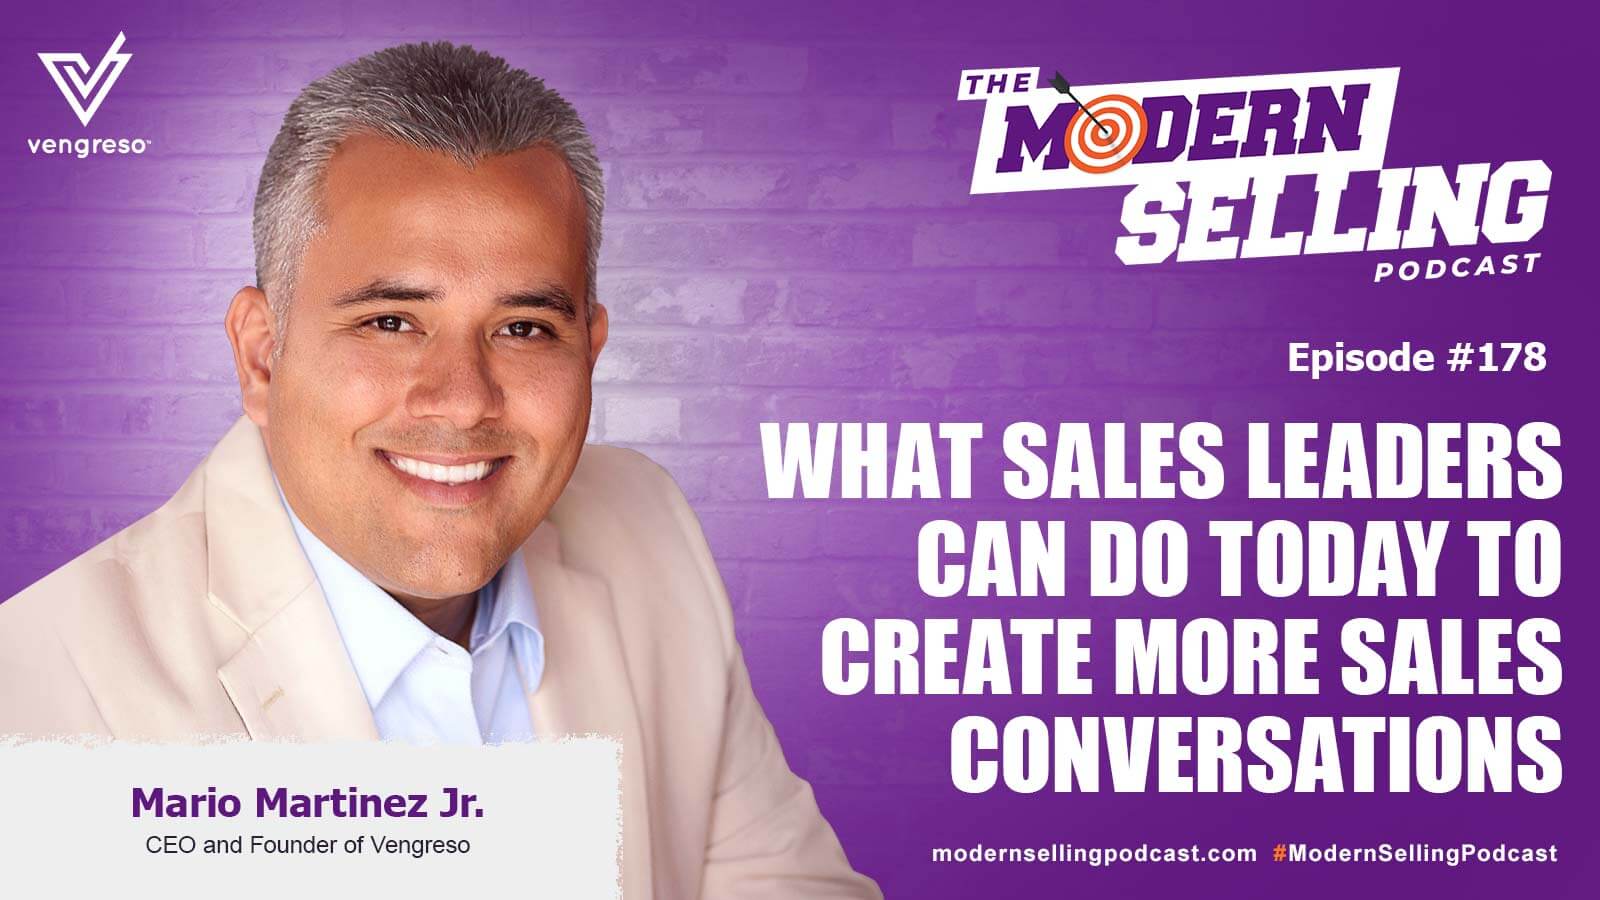 Start More Sales Conversations Podcast